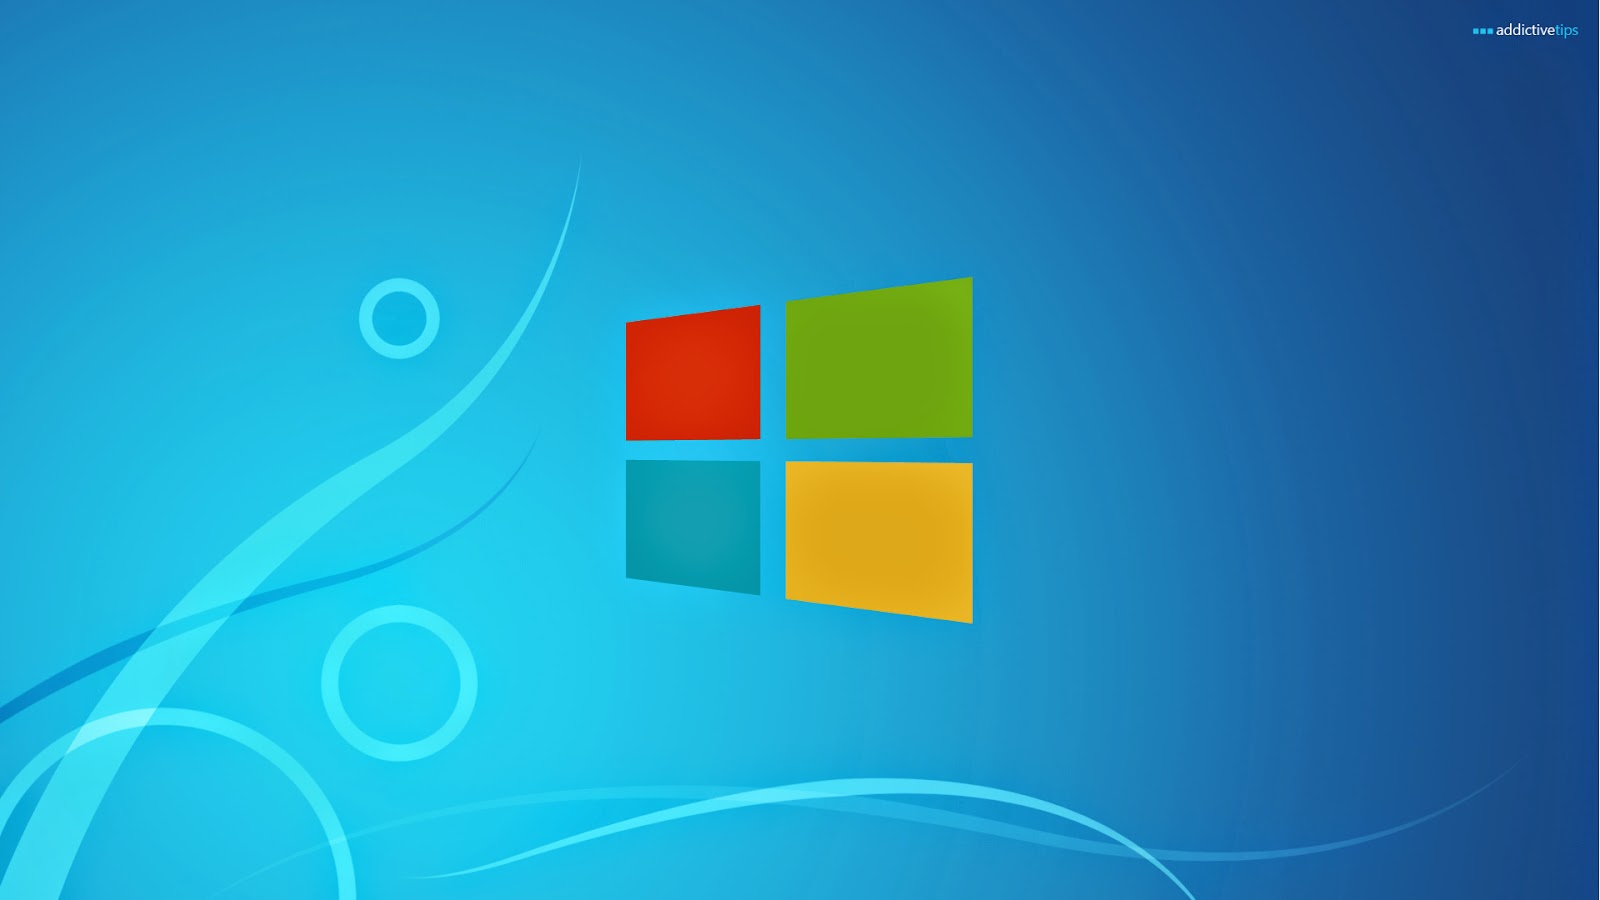 Windows 8 Wallpapers HD 3D For Desktop - Search Photos & Backgrounds